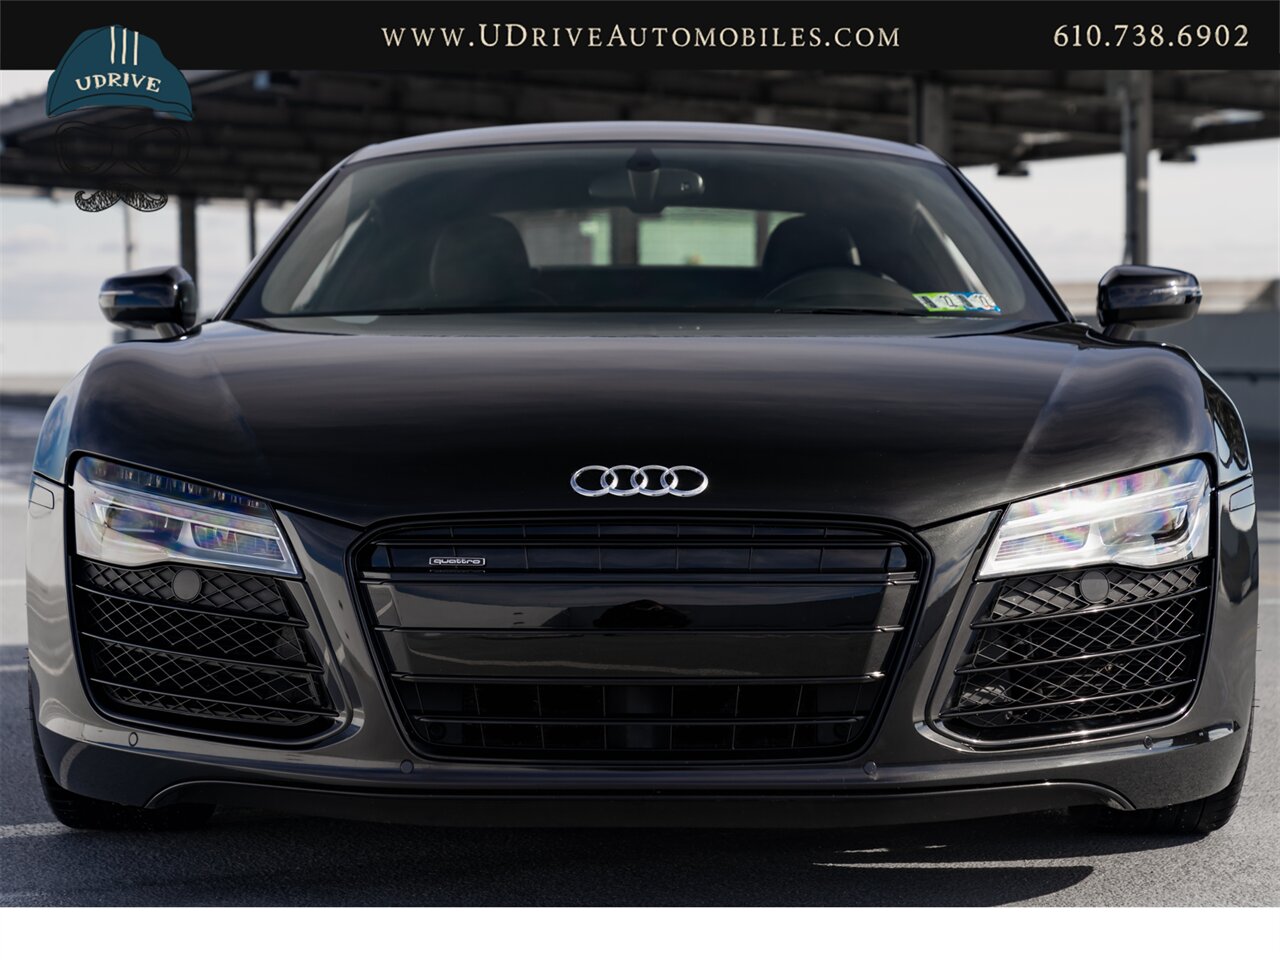 2014 Audi R8 5.2 Quattro  V10 RARE Panther Black 1 of 8 Produced Carbon Sigma Blades Service History - Photo 14 - West Chester, PA 19382